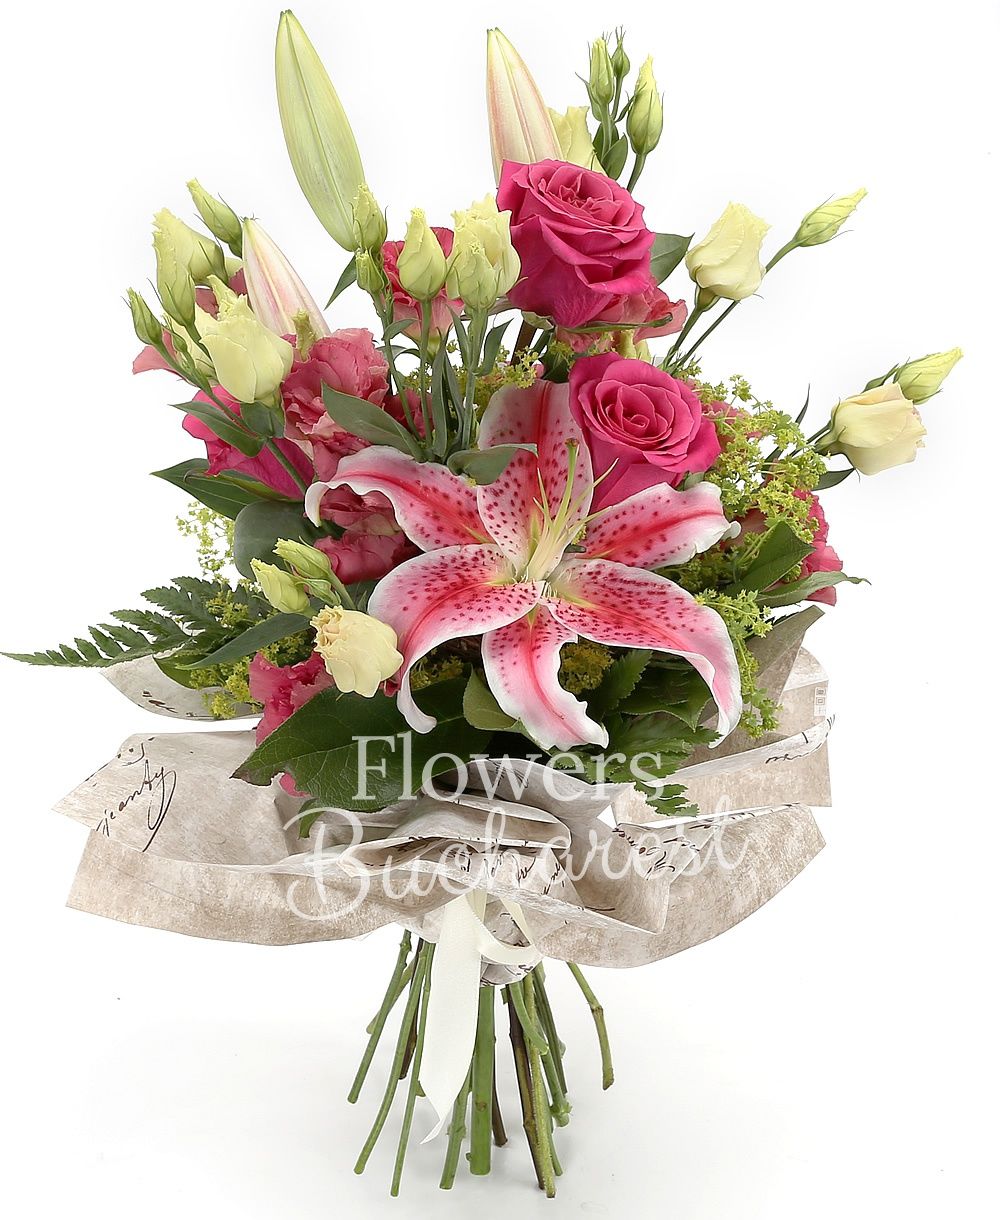 3 pink roses, 3 pink lisianthus, 1 lily, greenery